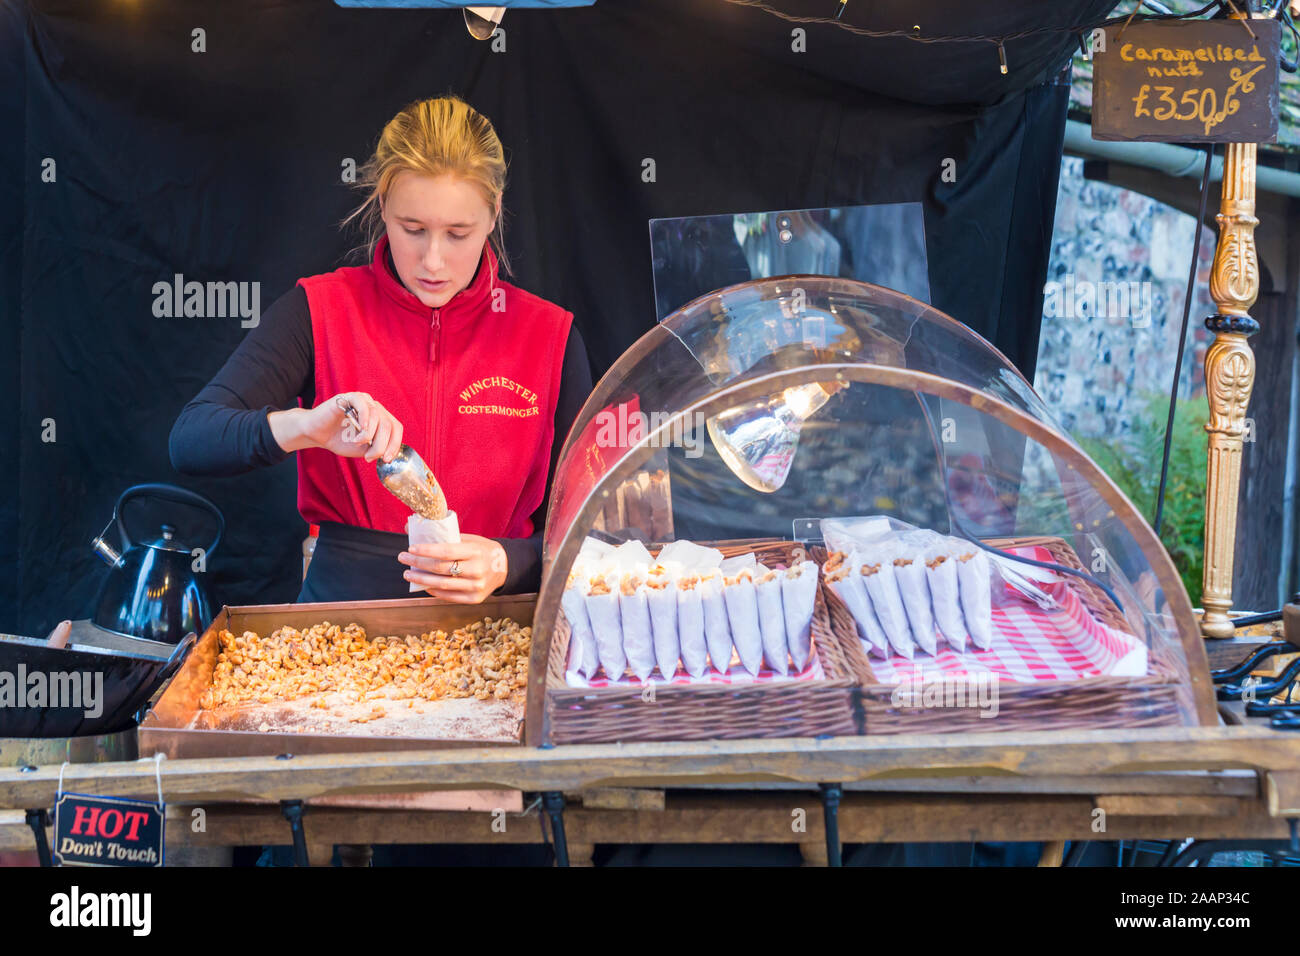 Winchester Costermonger bagging up caramelised nuts at Winchester Christmas Market, Hampshire, UK in December Stock Photo